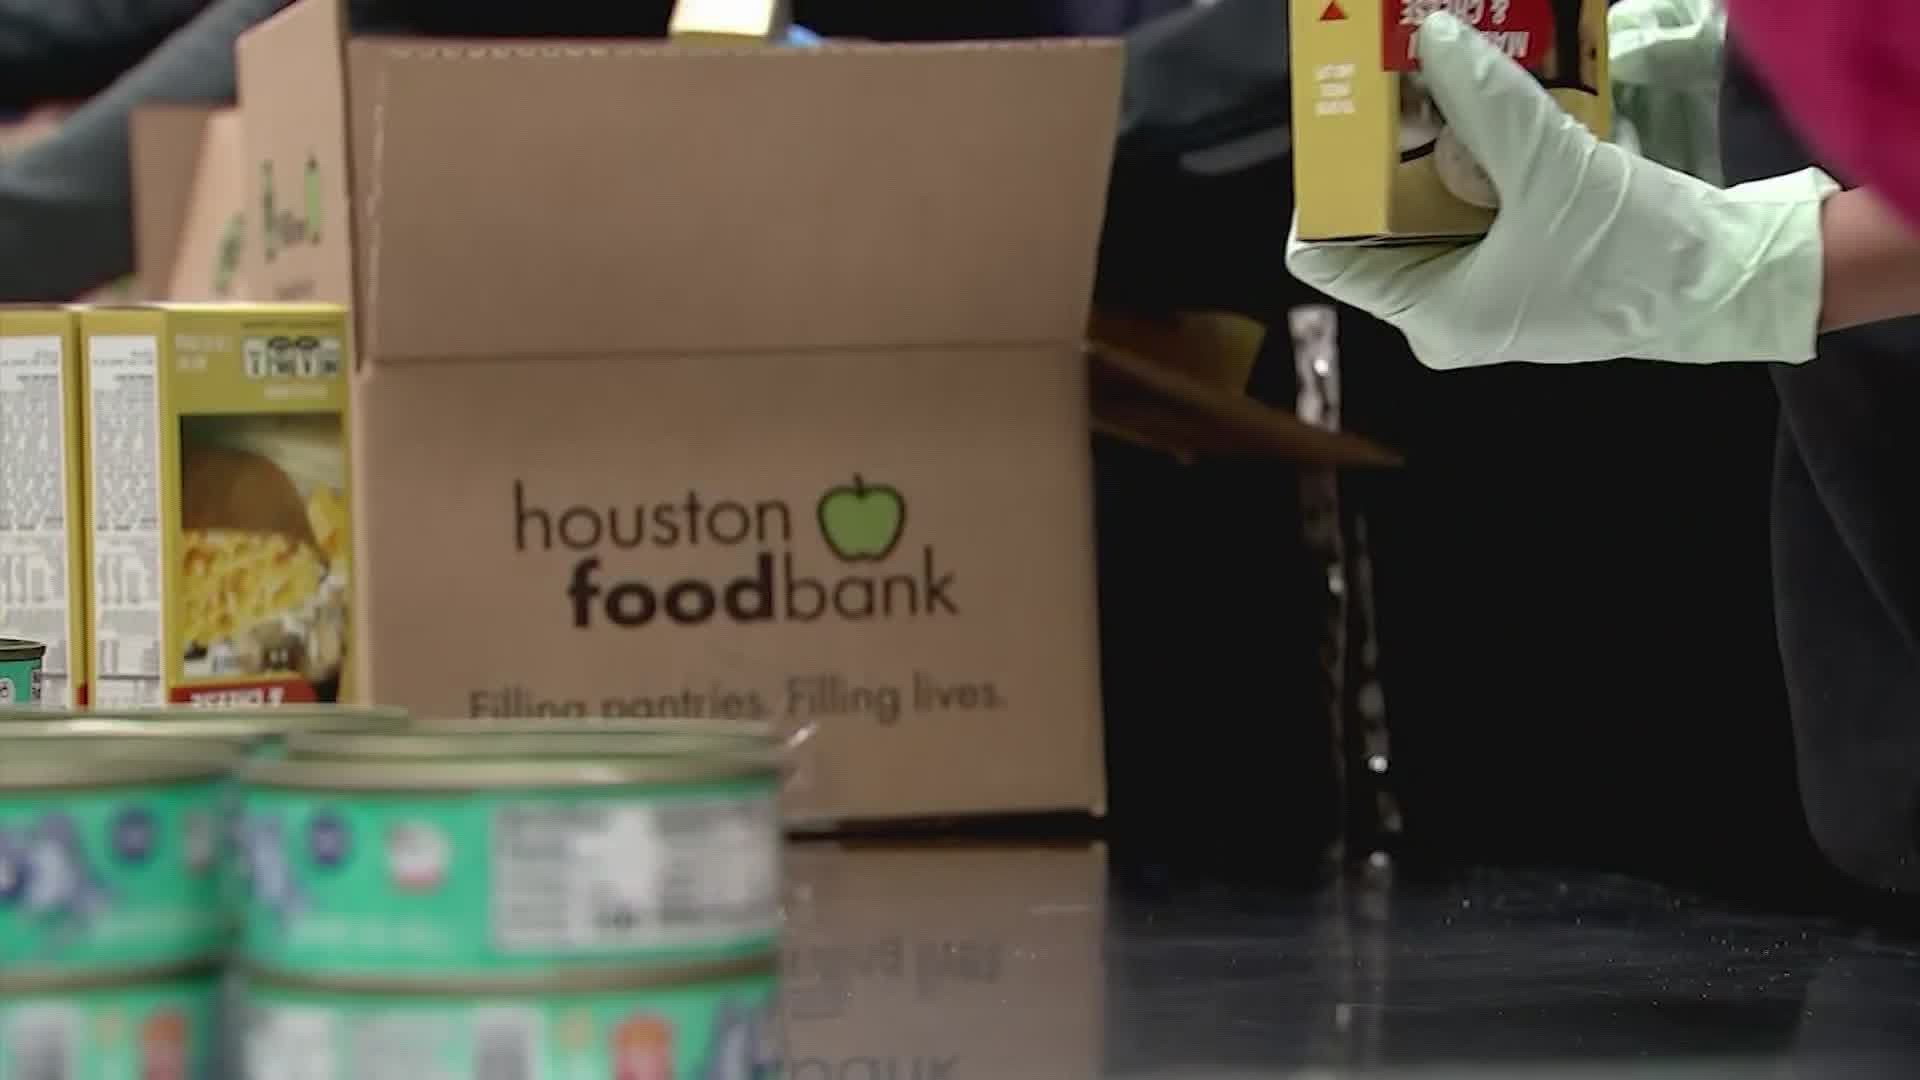 The Houston Food Bank is getting worldwide attention after recent visits from President Joe Biden, First Lady Dr. Jill Biden, and Rep. Alexandria Ocasio-Cortez.